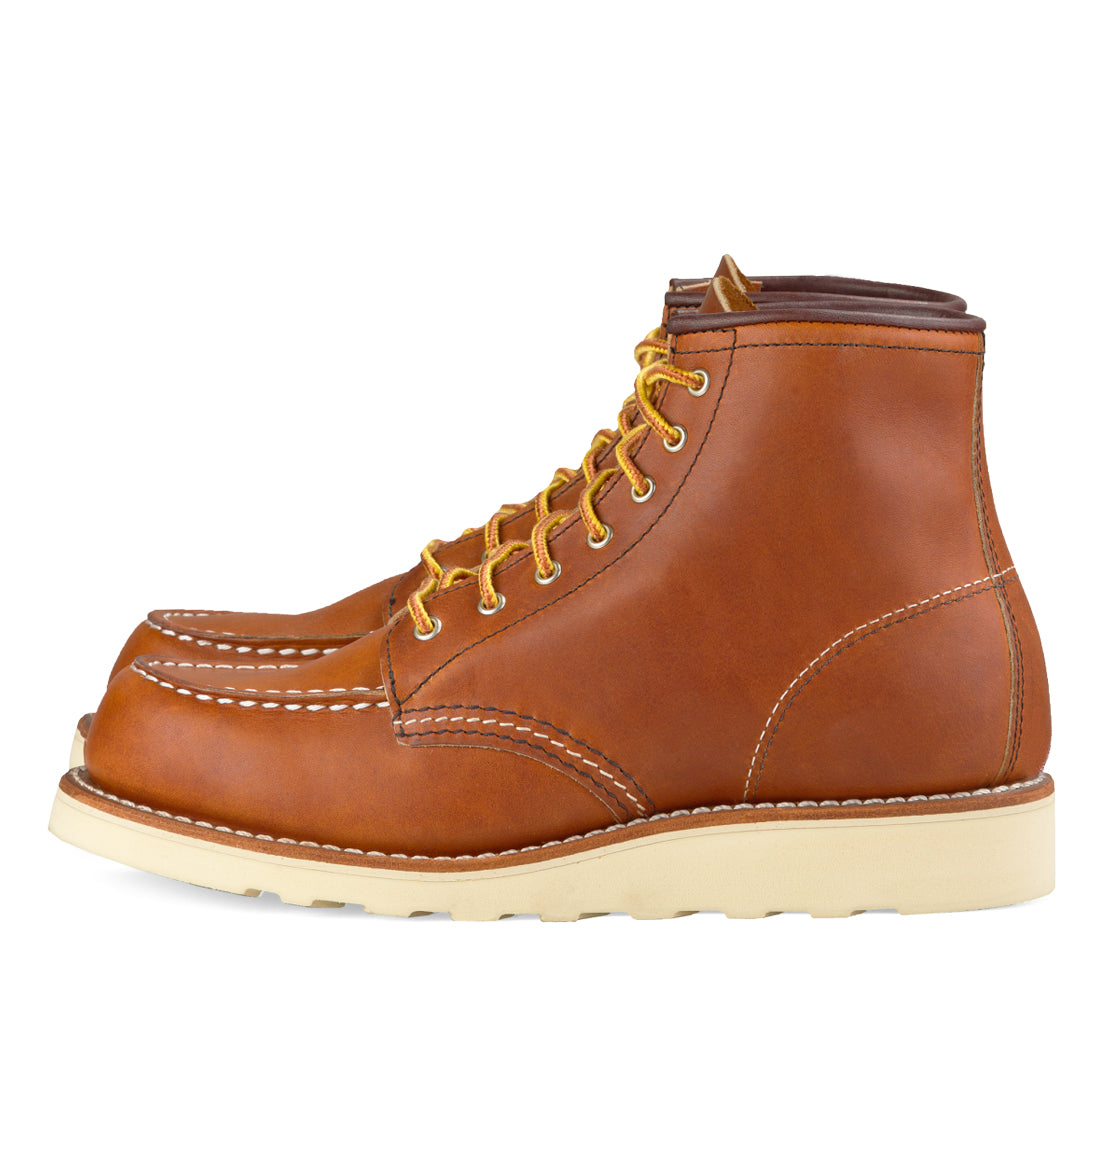 Ladies moc toe boots leicester